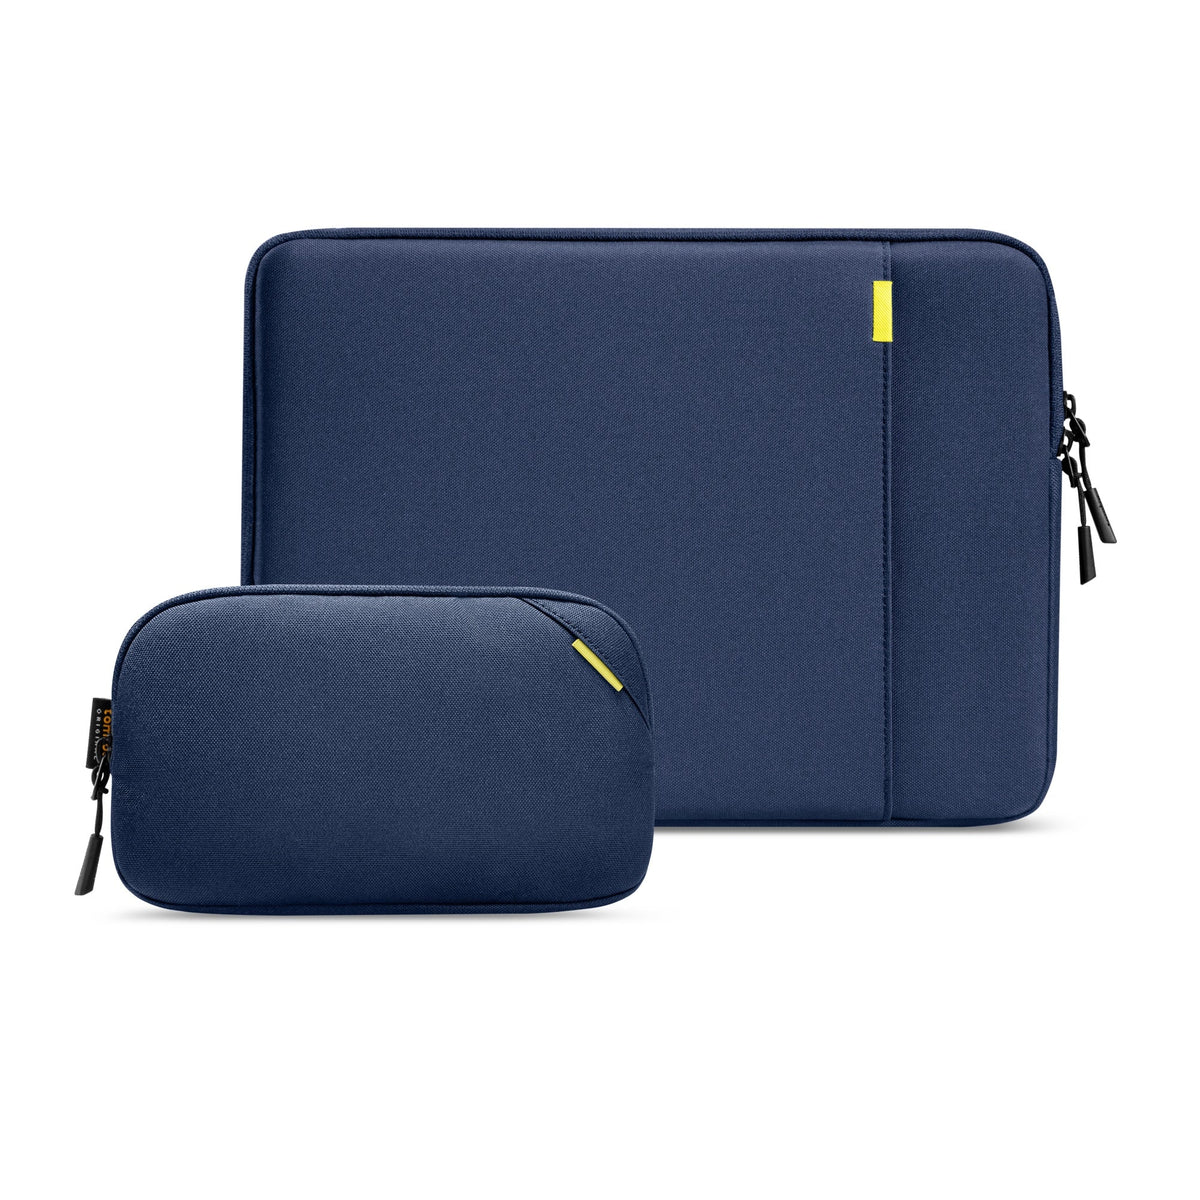 primary_Defender-A13 Laptop Sleeve Kit For 14-inch New MacBook Pro | Navy Blue